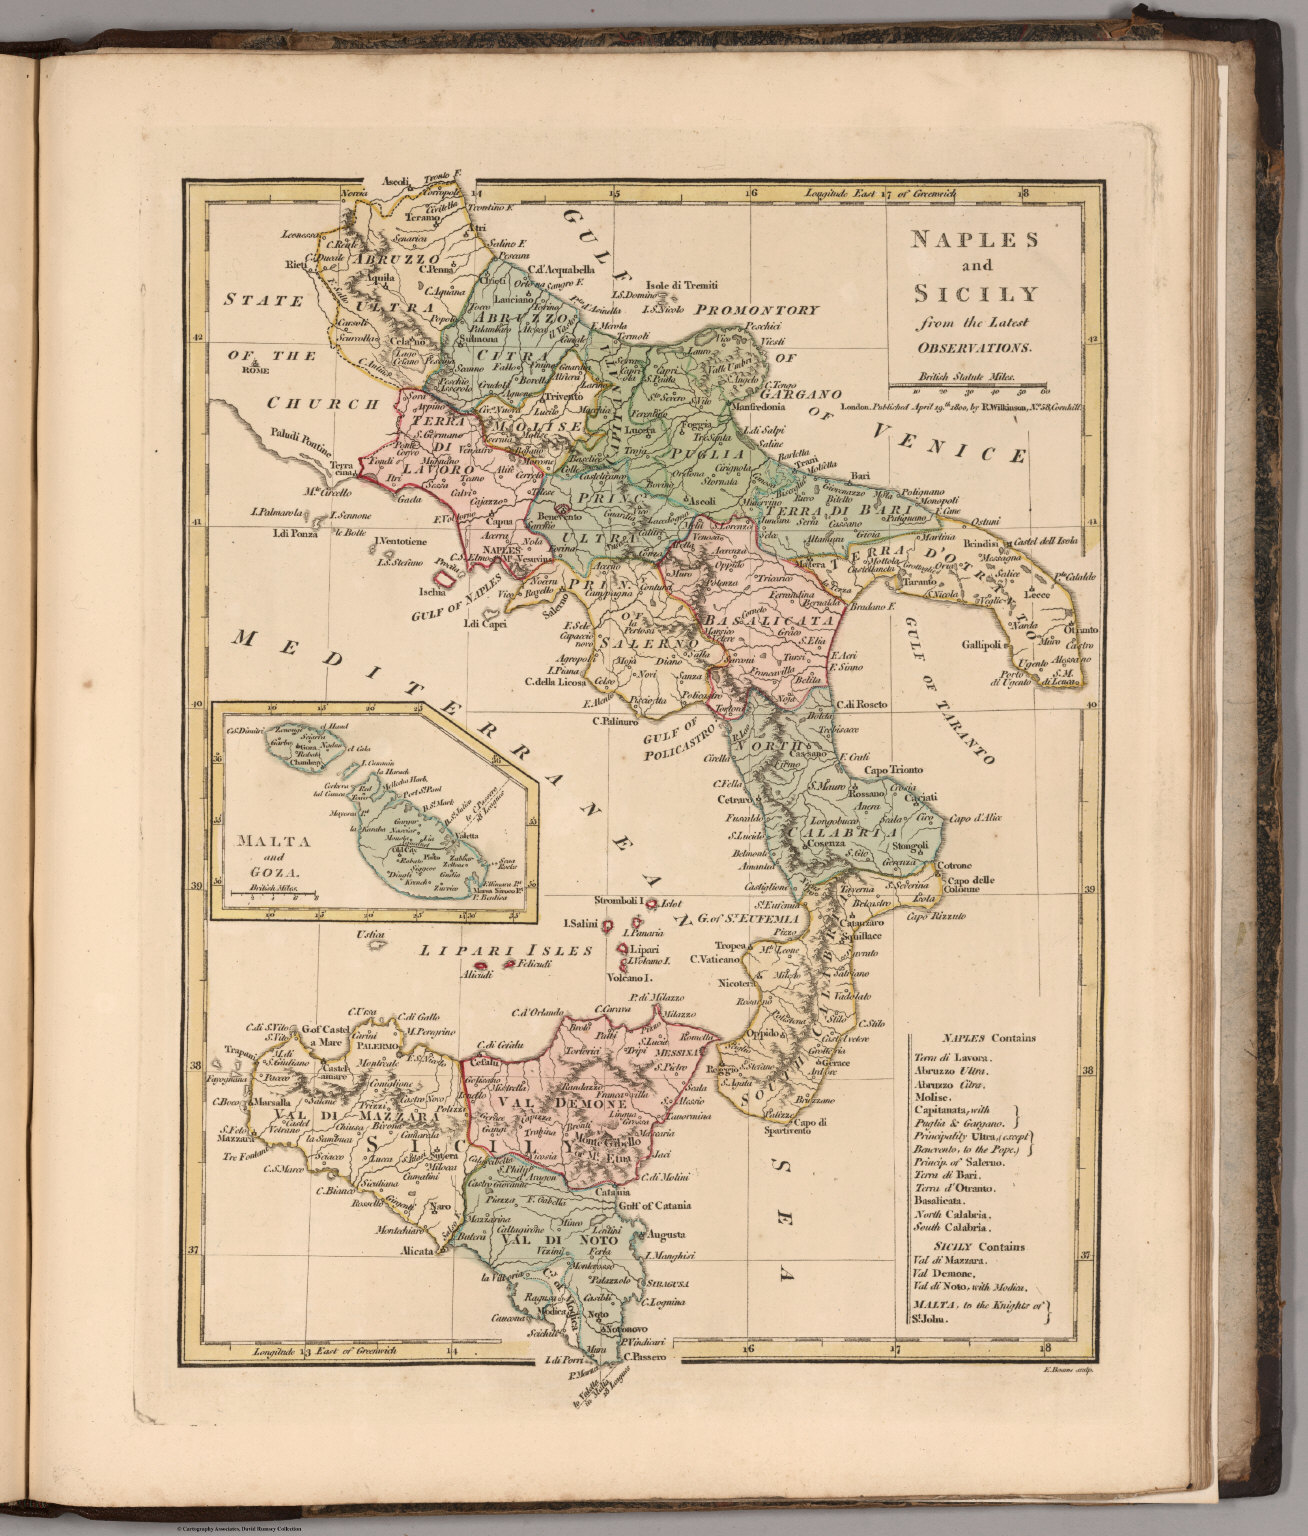 Naples And Sicily David Rumsey Historical Map Collection